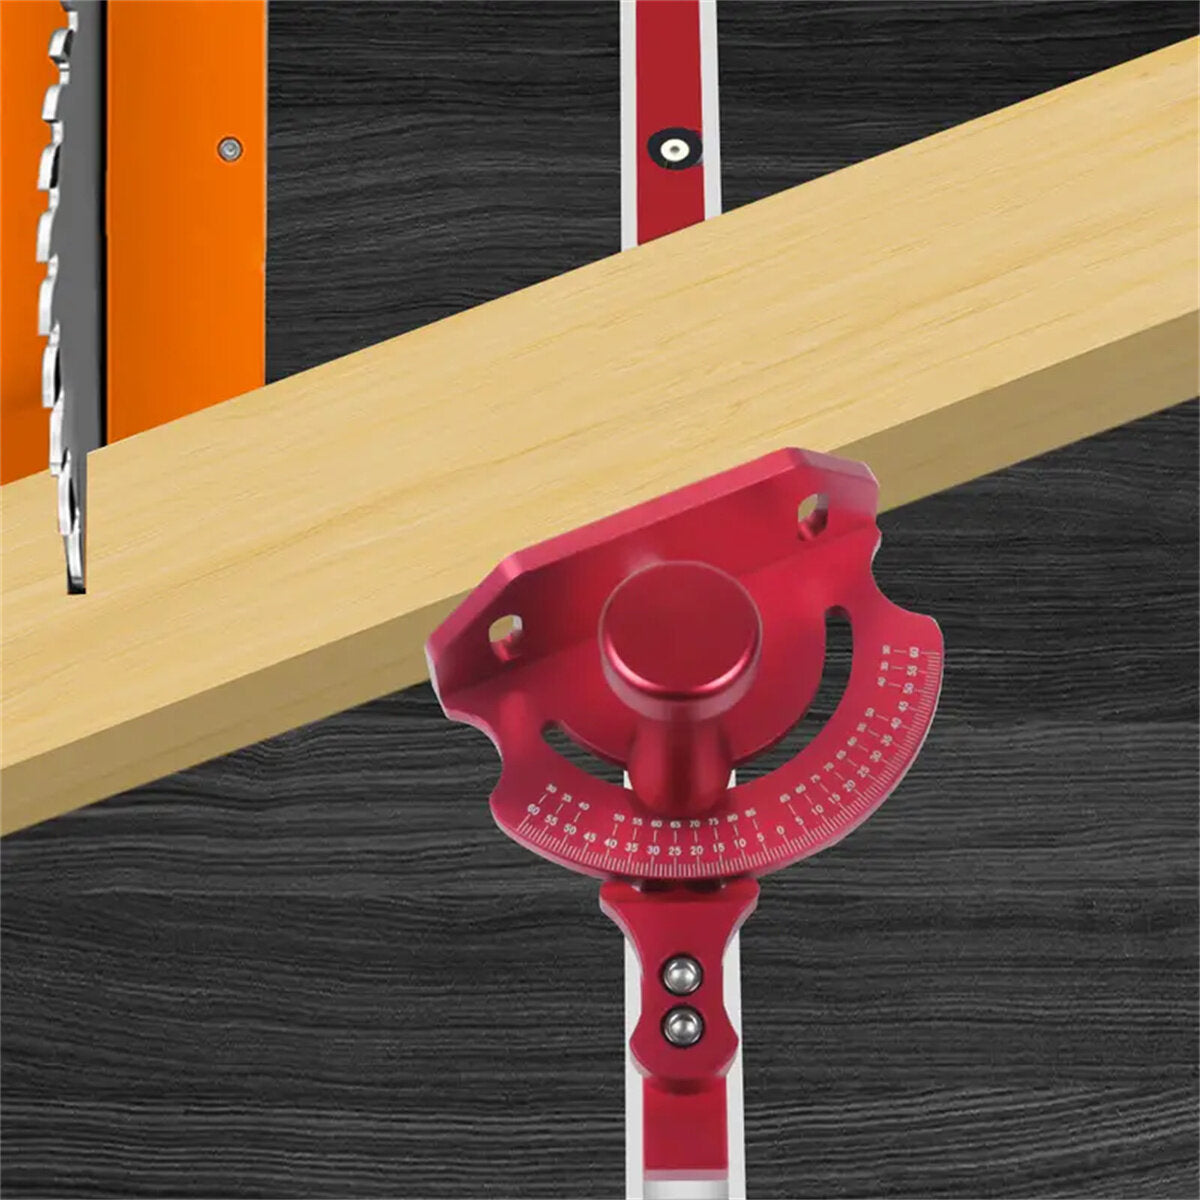 Miter Gauge W/ Fixed Angle Gear Shifting Hole Universal Table Saw Gauge, Miter Saw Protractor With A Standard Slot Bar